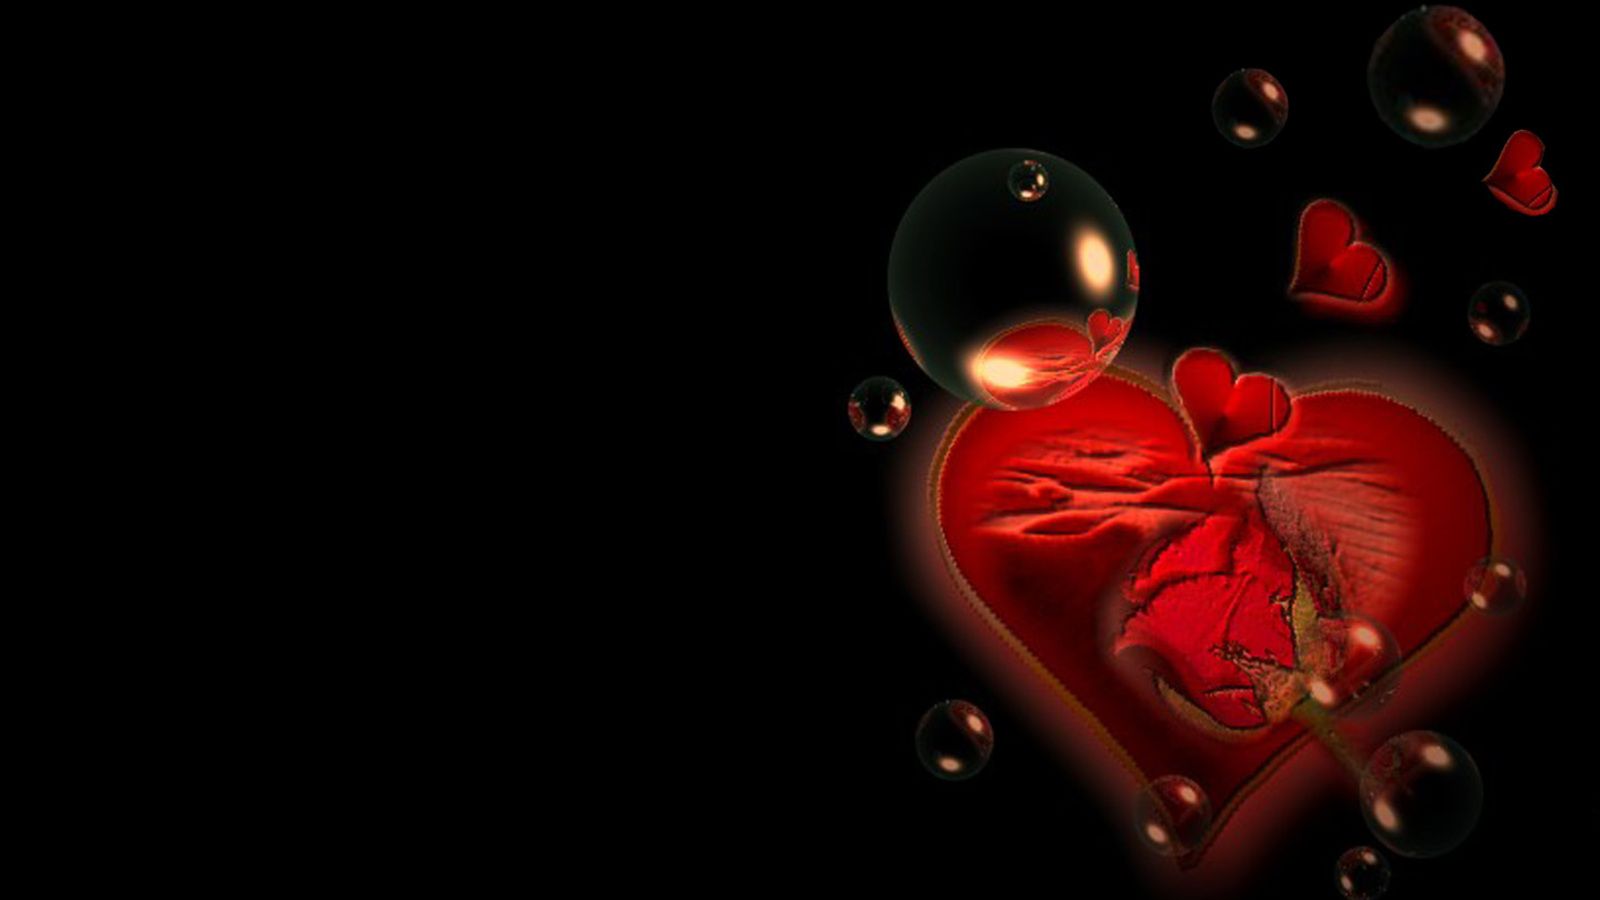 Love Wallpapers | Live HD Wallpaper HQ Pictures, Images, Photos ...